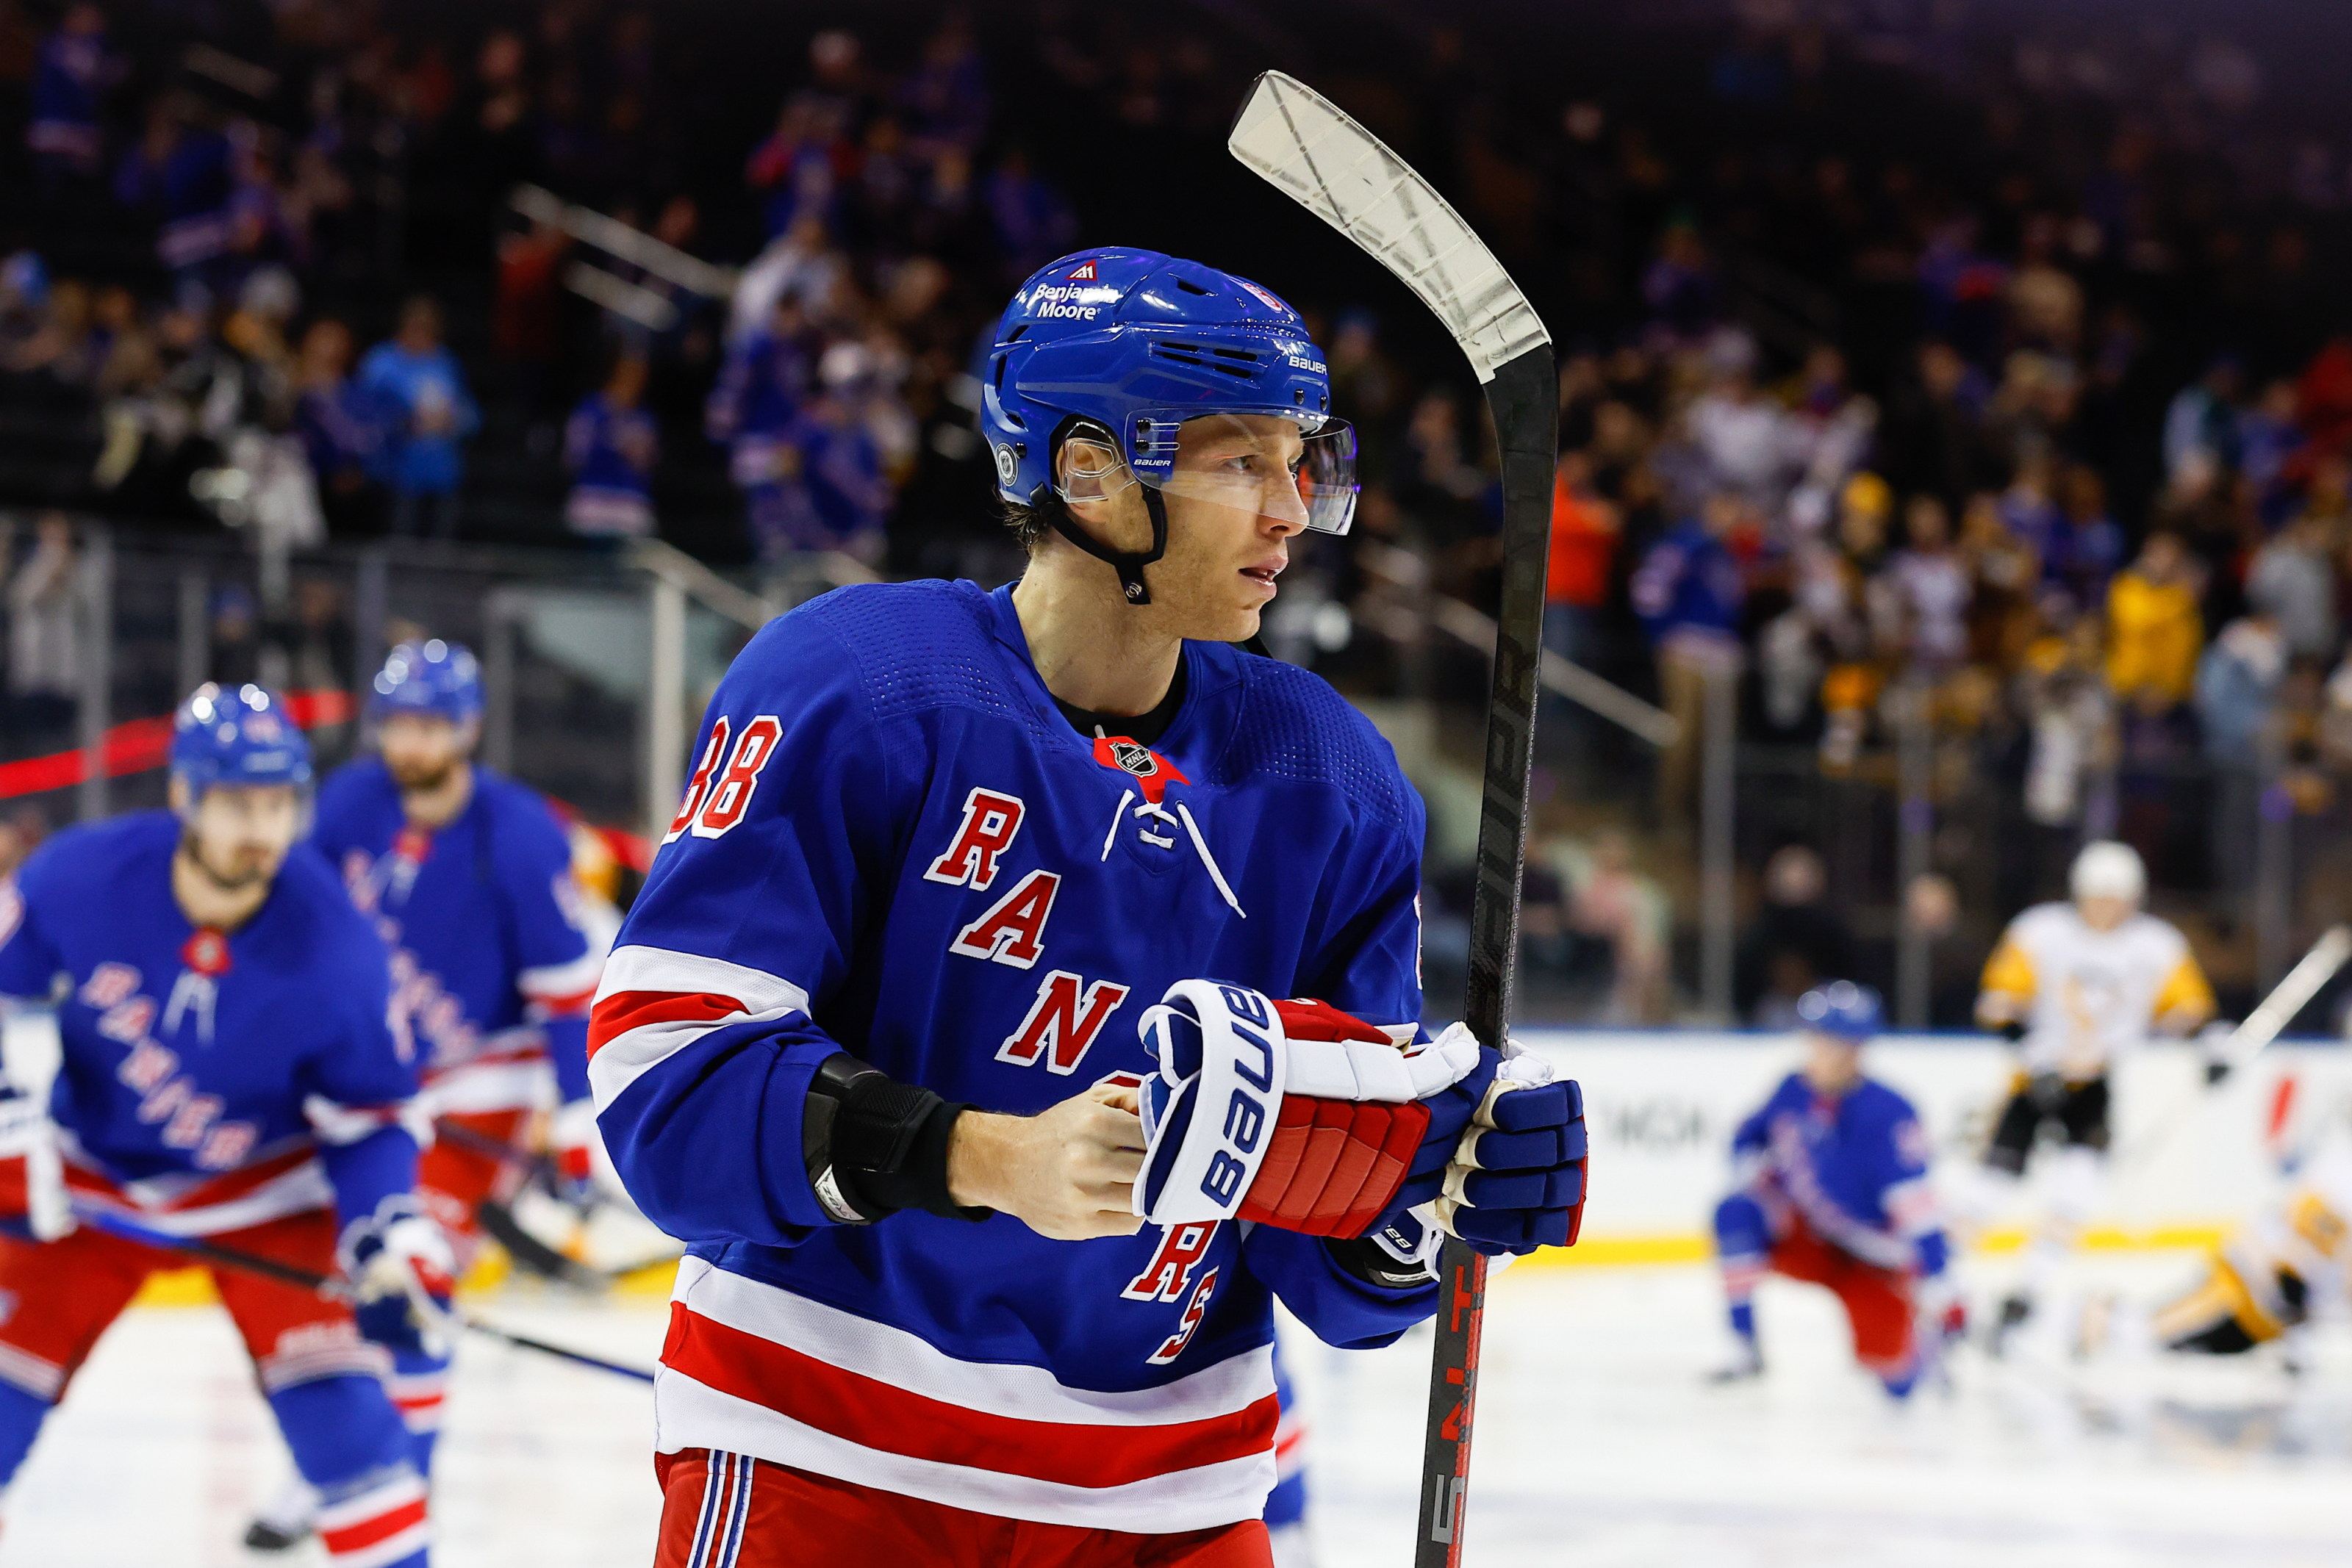 With Patrick Kane rumors heating up, Rangers lose to Red Wings